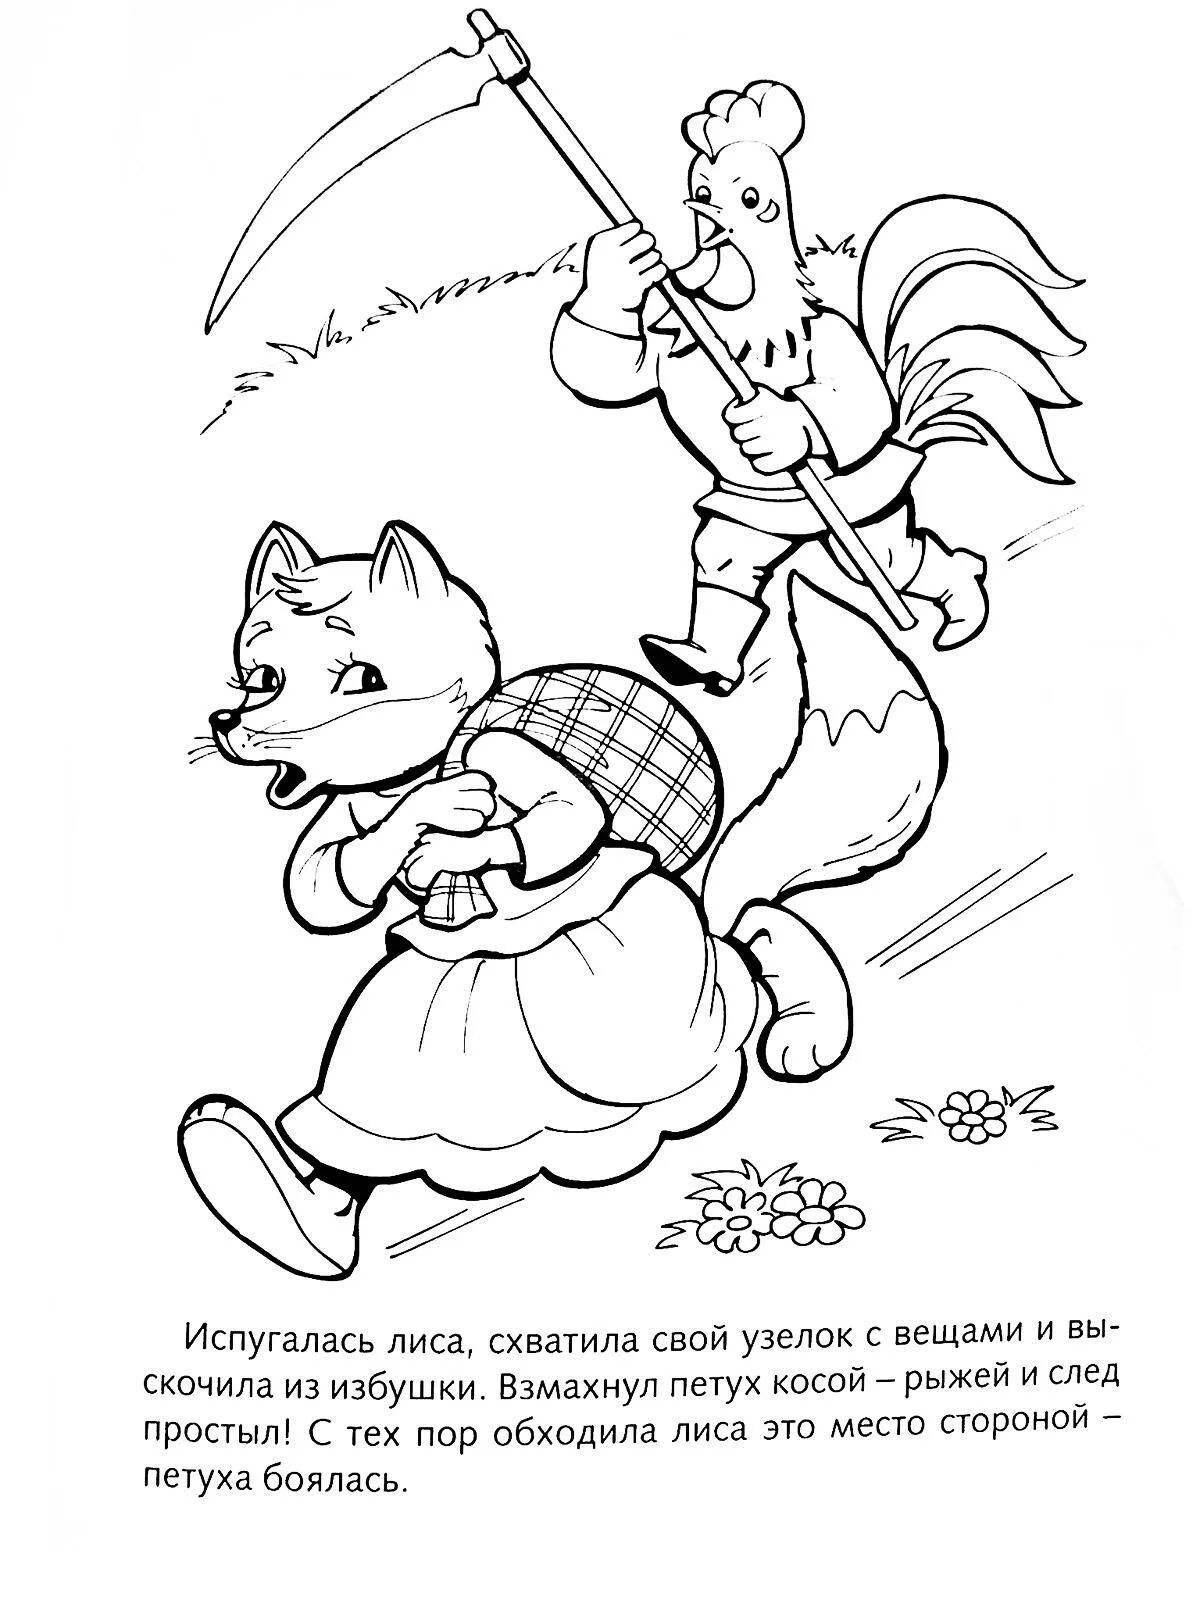 Fun coloring book based on Russian folk tales for preschoolers